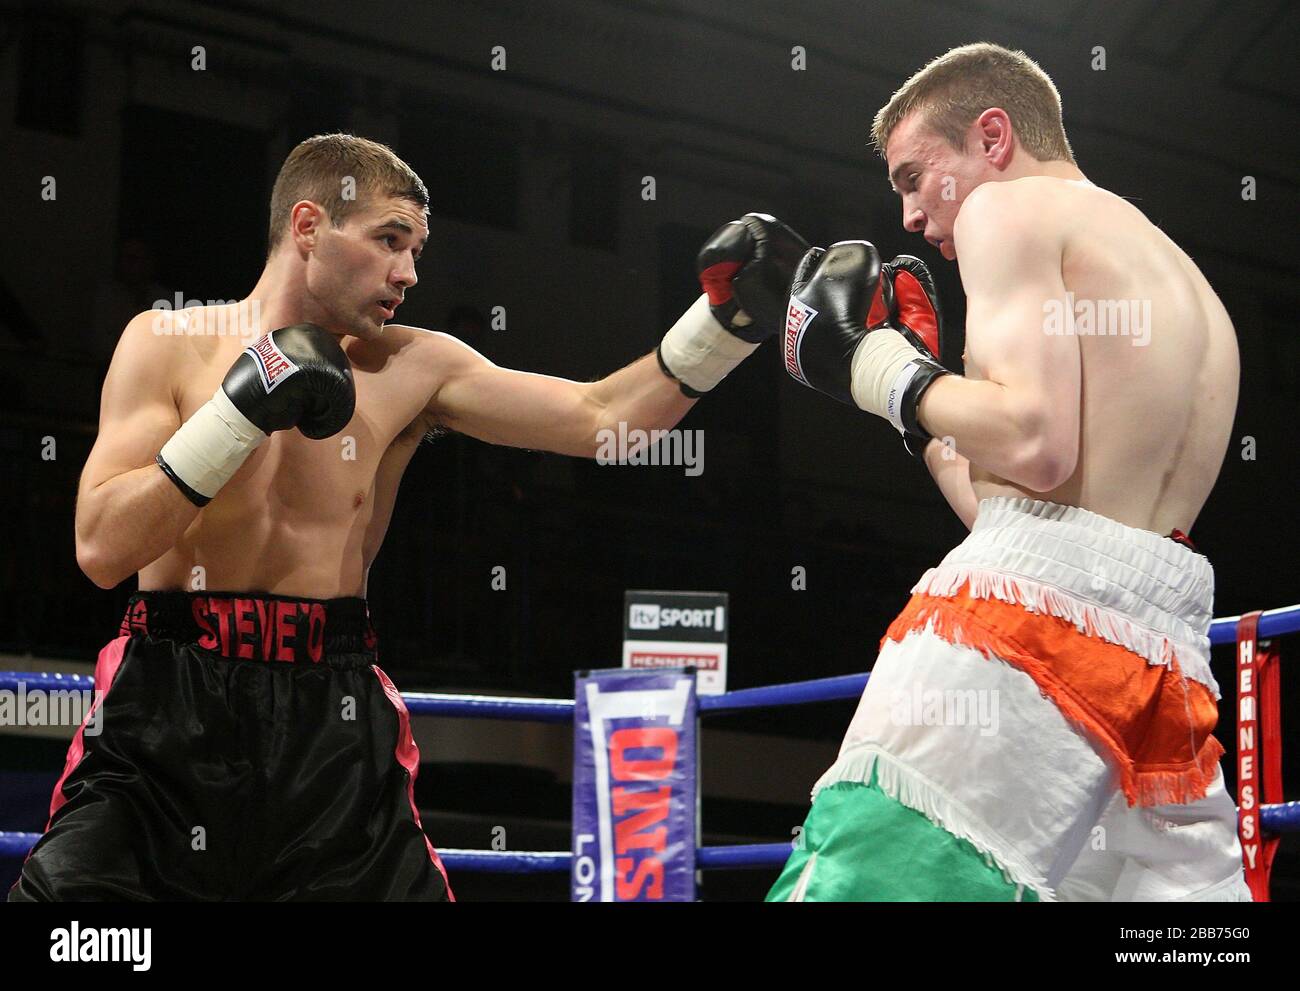 Steve O'Meara (West Drayton, black/pink shorts) defeats Lewis  Byrne(Cambridge, white/orange/green shorts) in a Light-Middleweight boxing  contest at Yo Stock Photo - Alamy